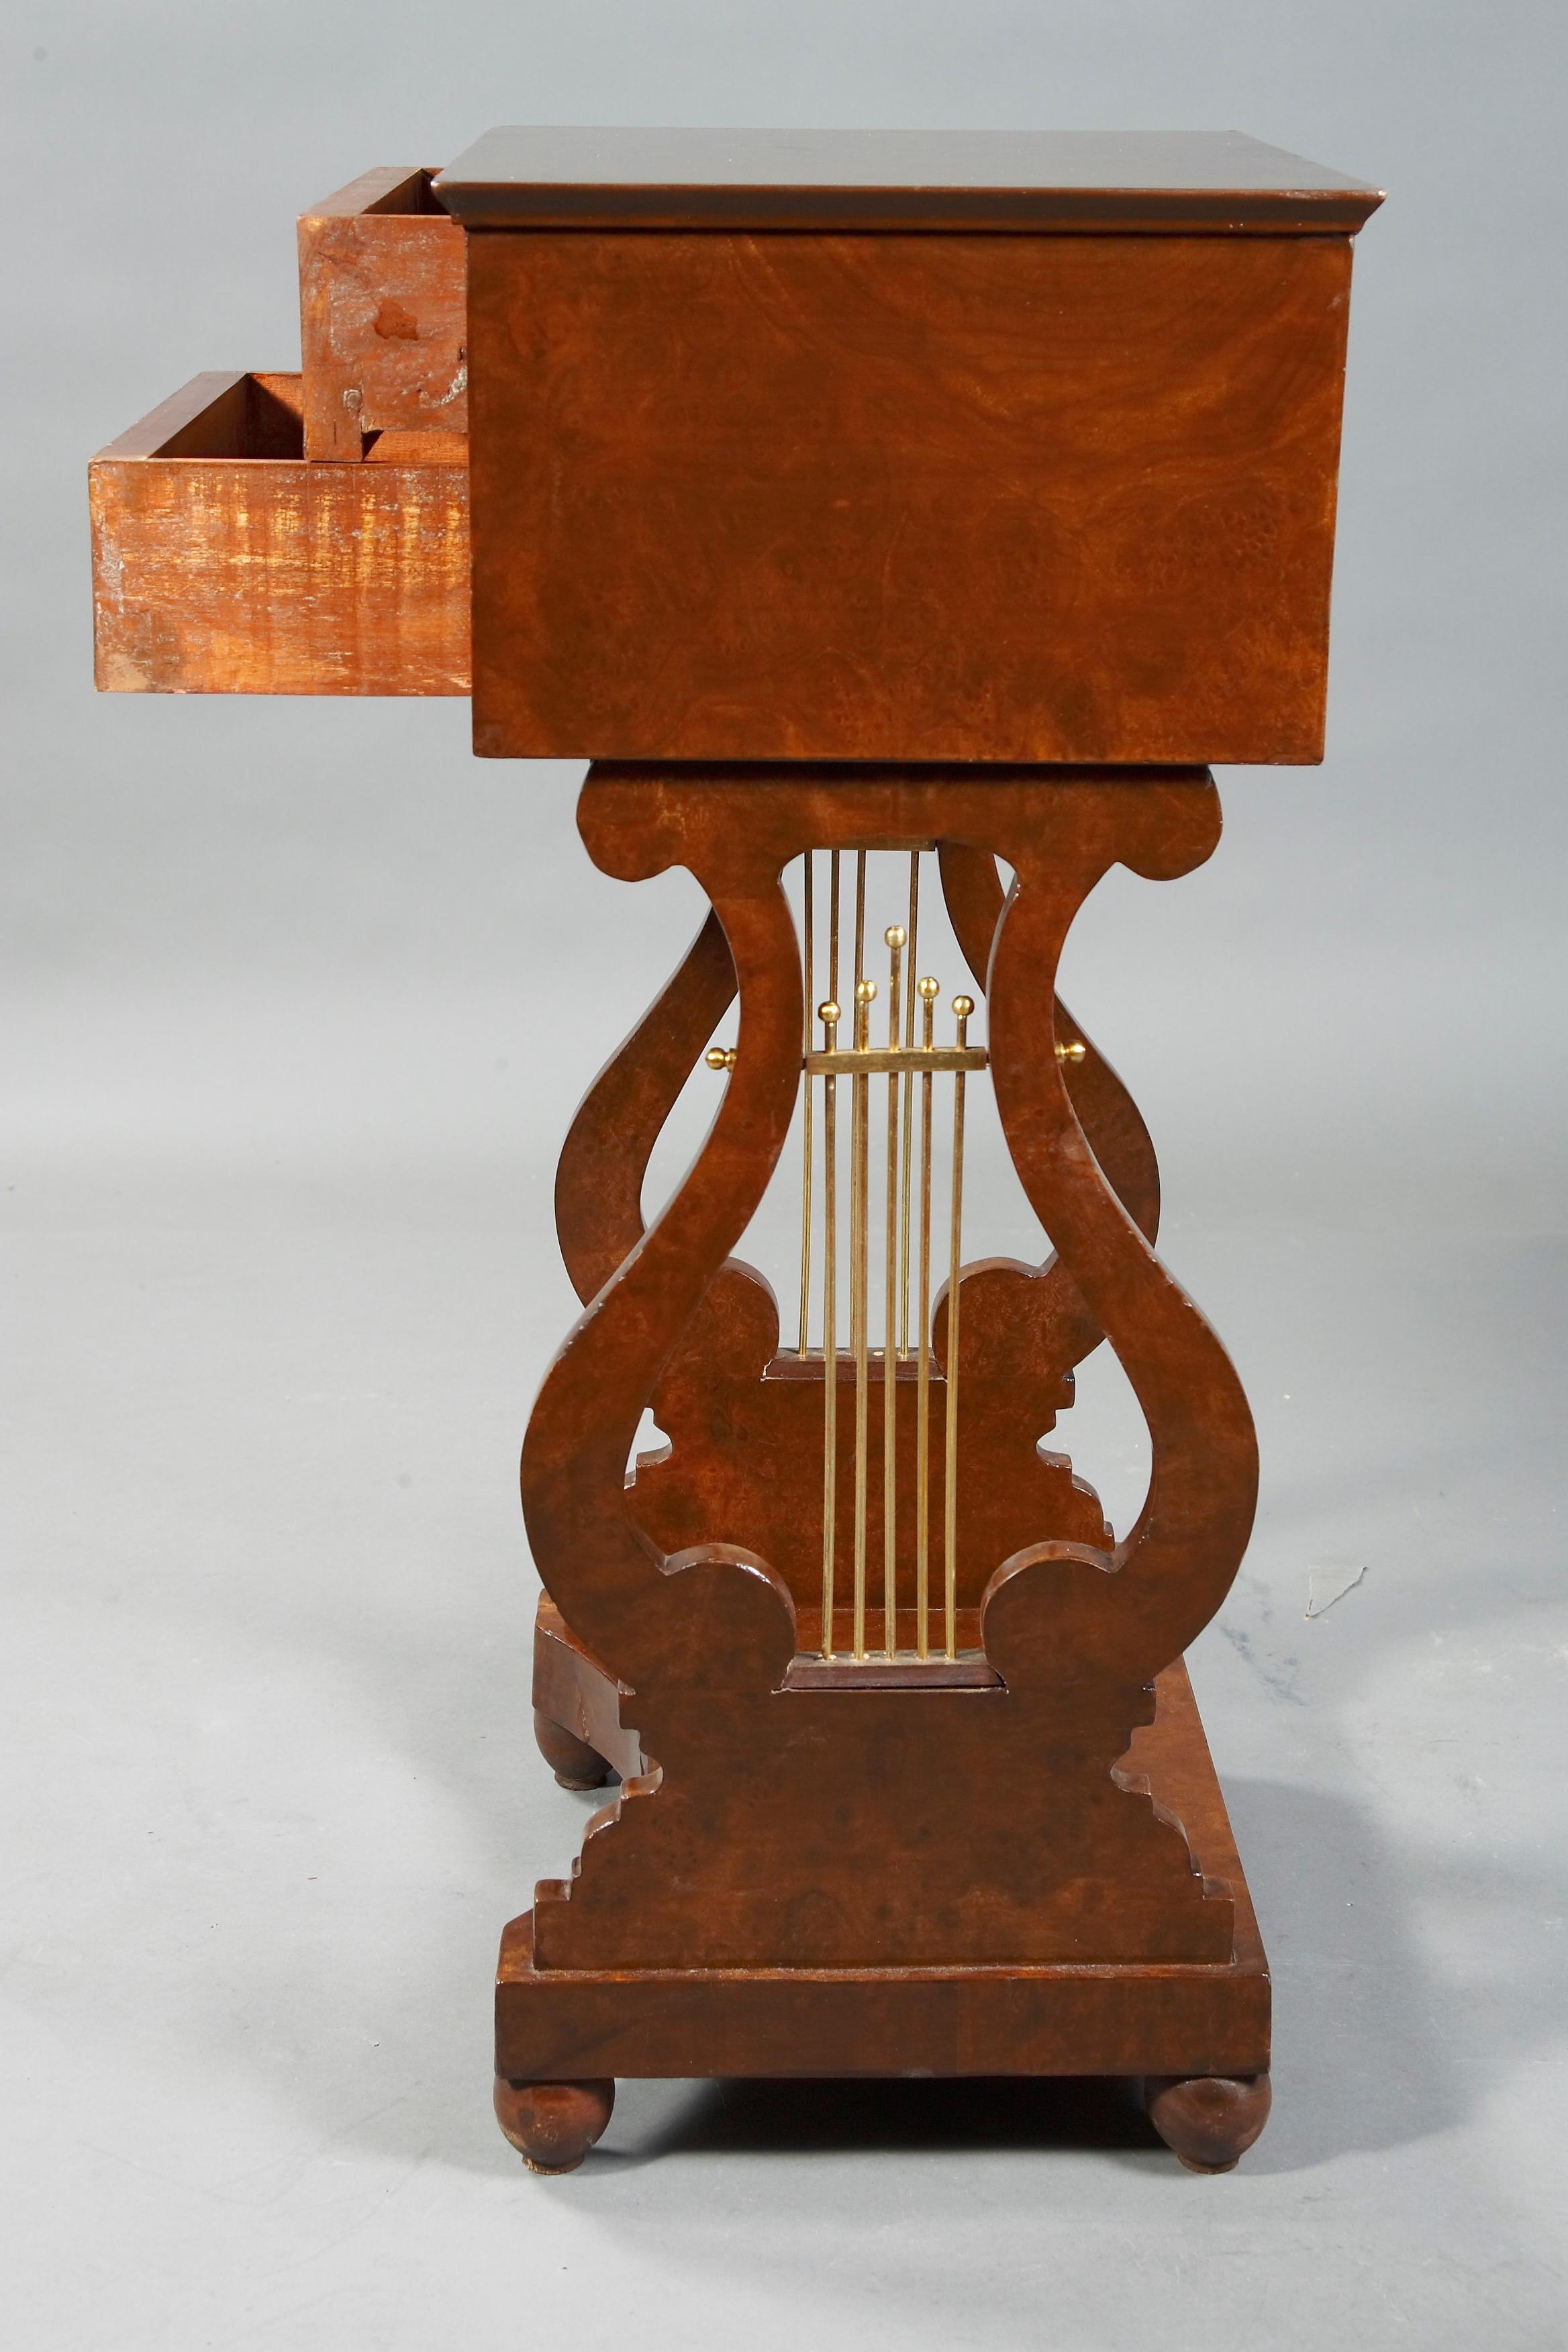 Dark walnut on solid softwood. Straight, two-bay frame base on lyre-shaped, openwork cheeks with metal sides. Four-sided retracted base plate. Upper drawer with compartments. Protruding rectangular plate. Beautiful patina, with shellac

G-GM-91.